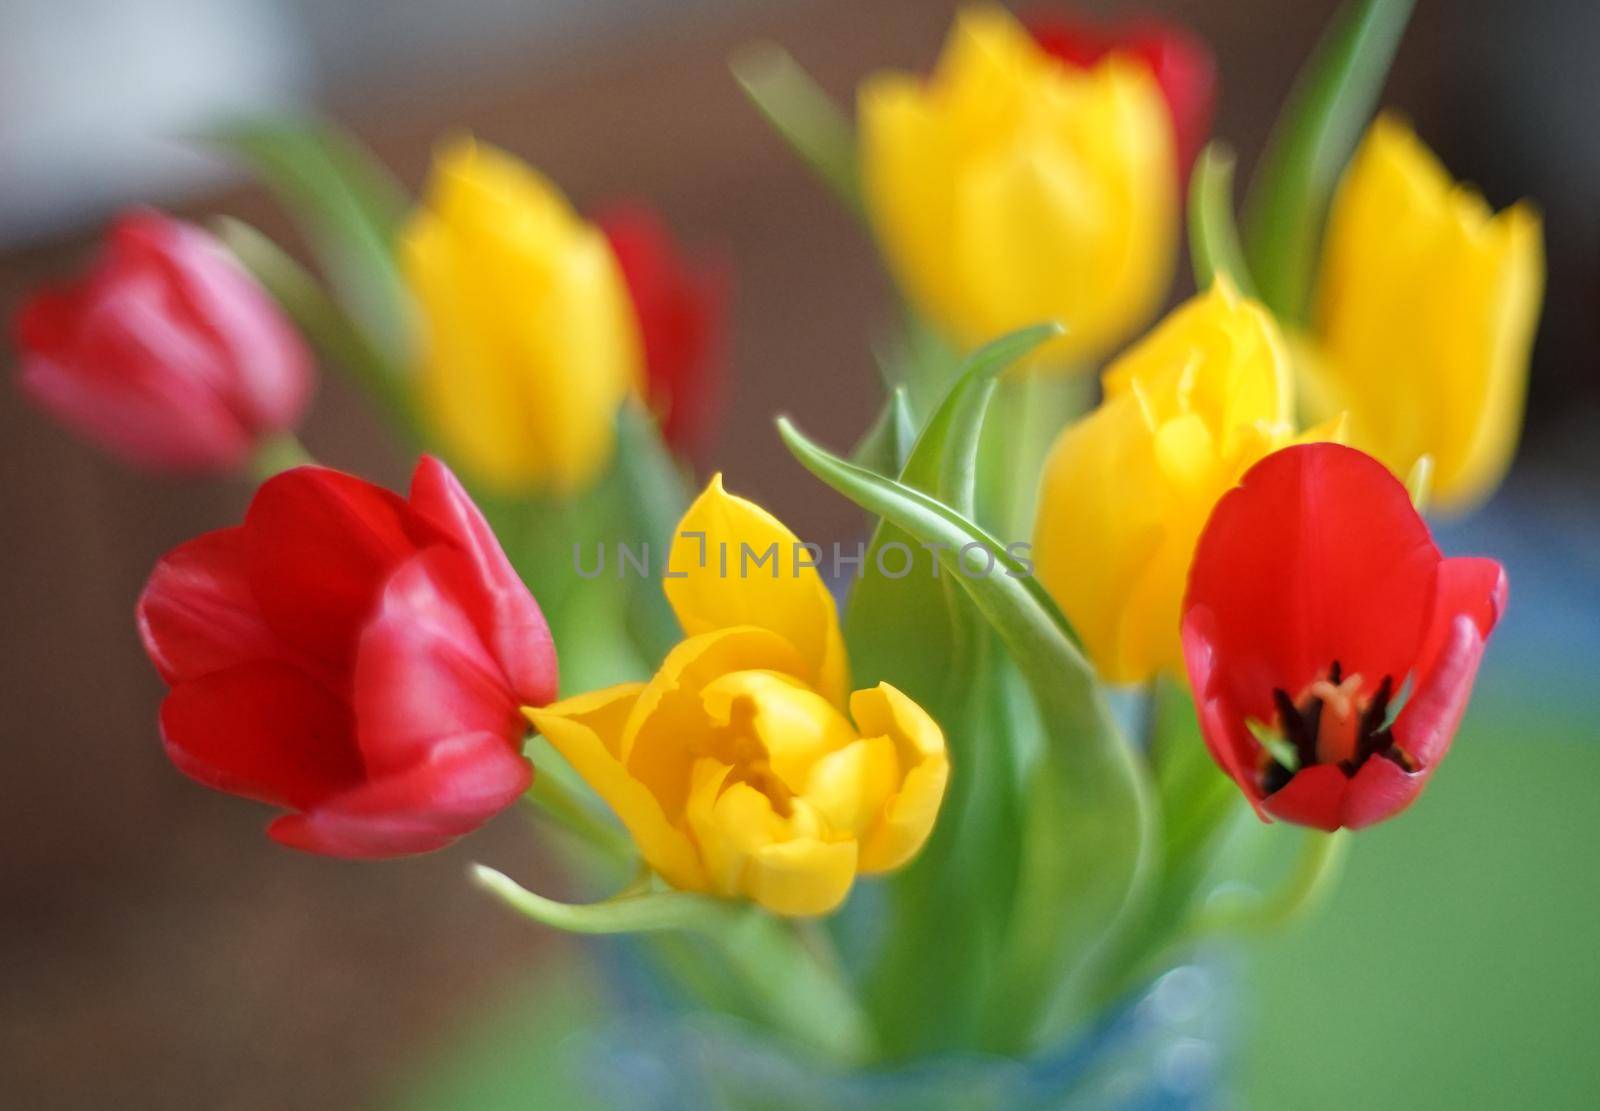 A bouquet of red and yellow blossoming tulips in a glass vase on the window.